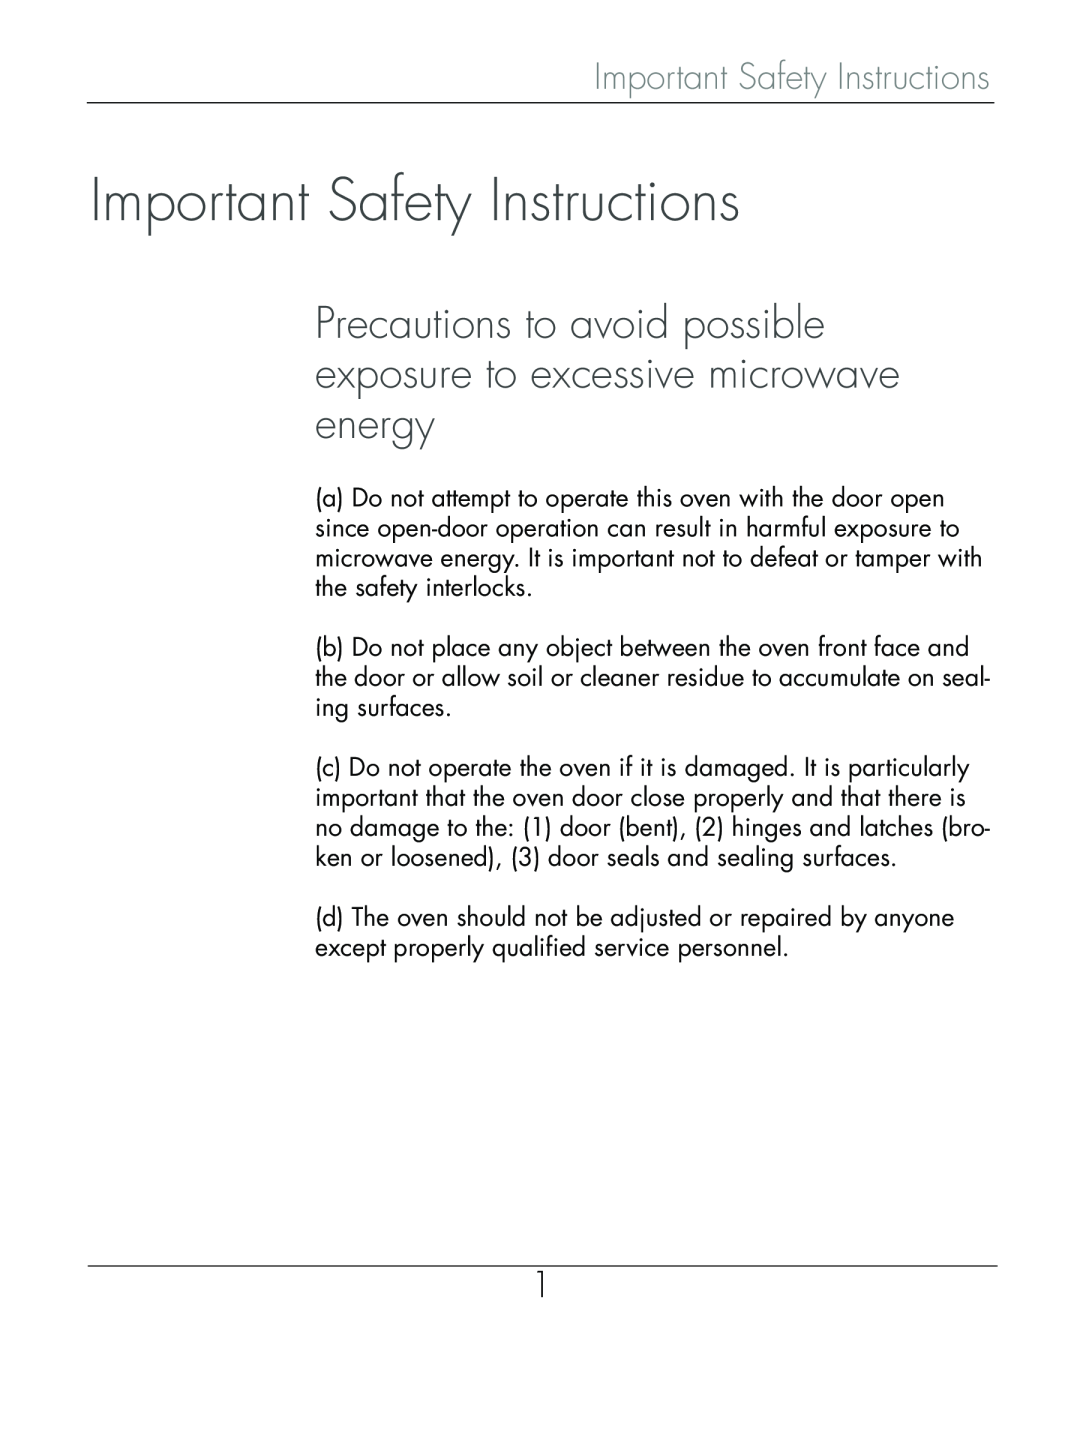 Beyond Microwace Oven Important Safety Instructions, Precautions to avoid possible exposure to excessive microwave energy 